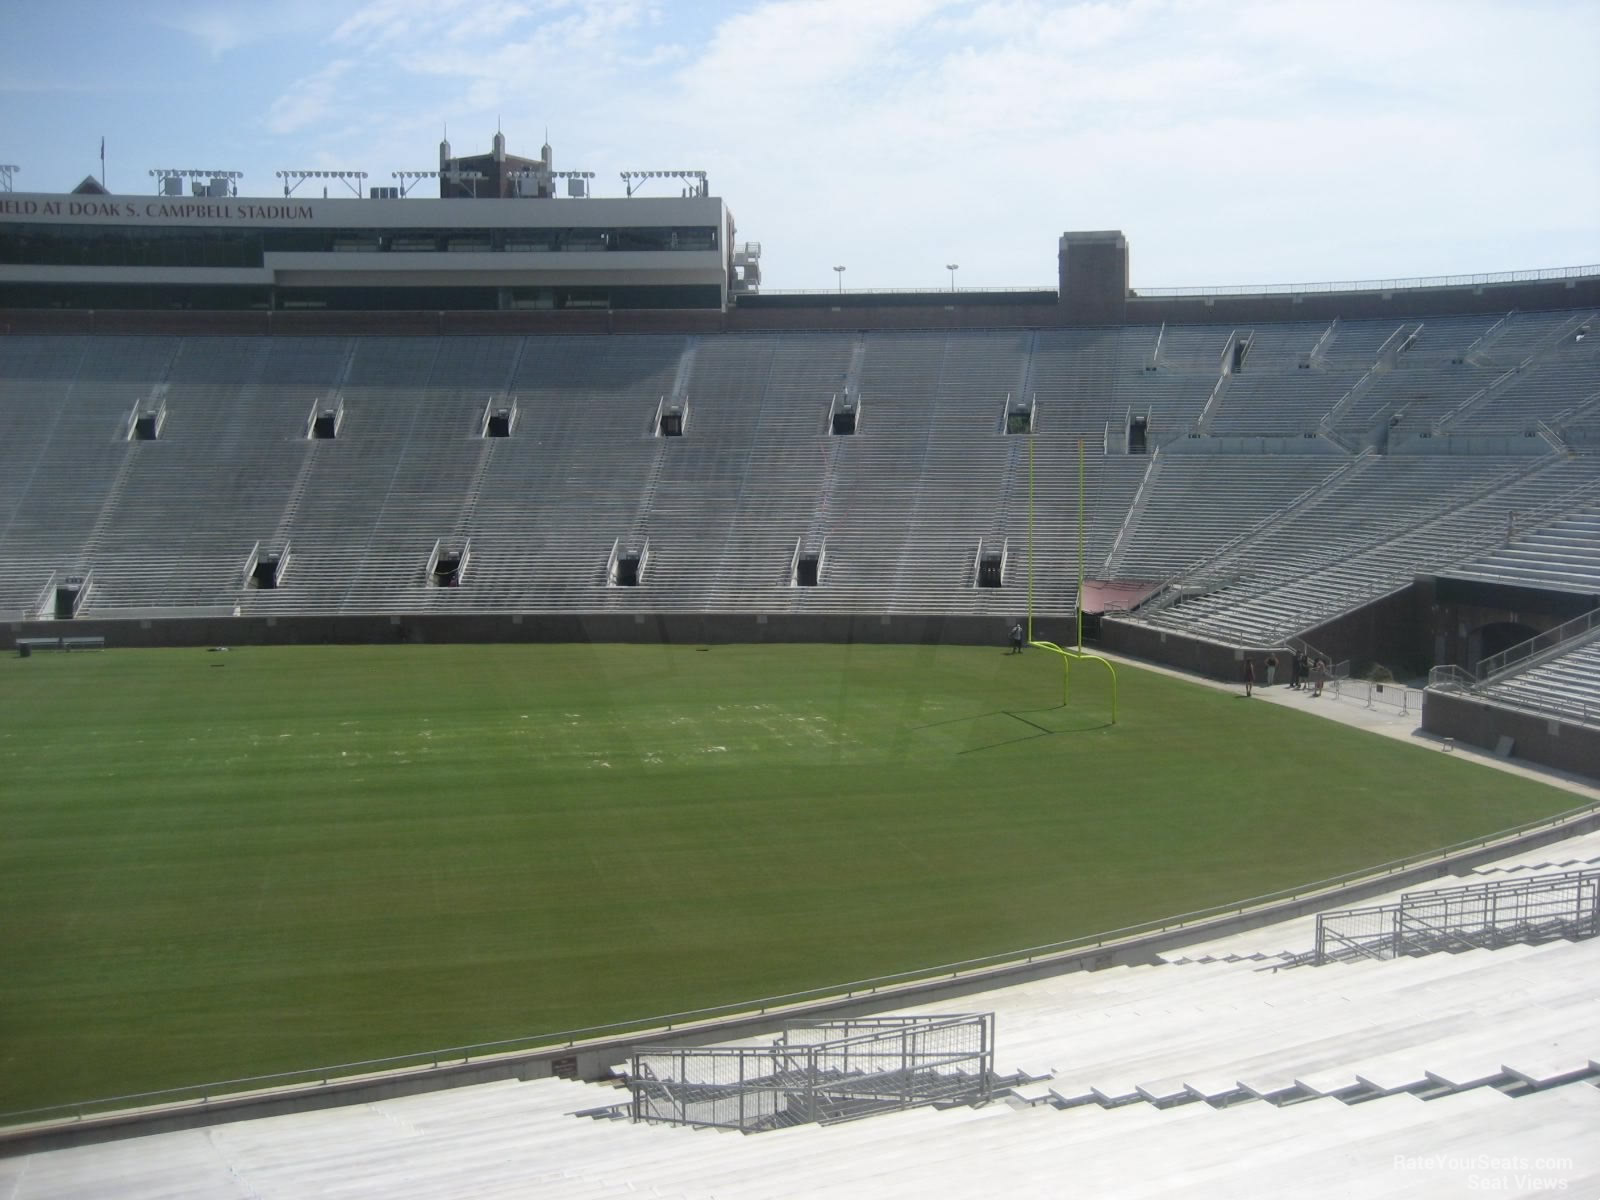 section 31, row 41 seat view  - doak campbell stadium